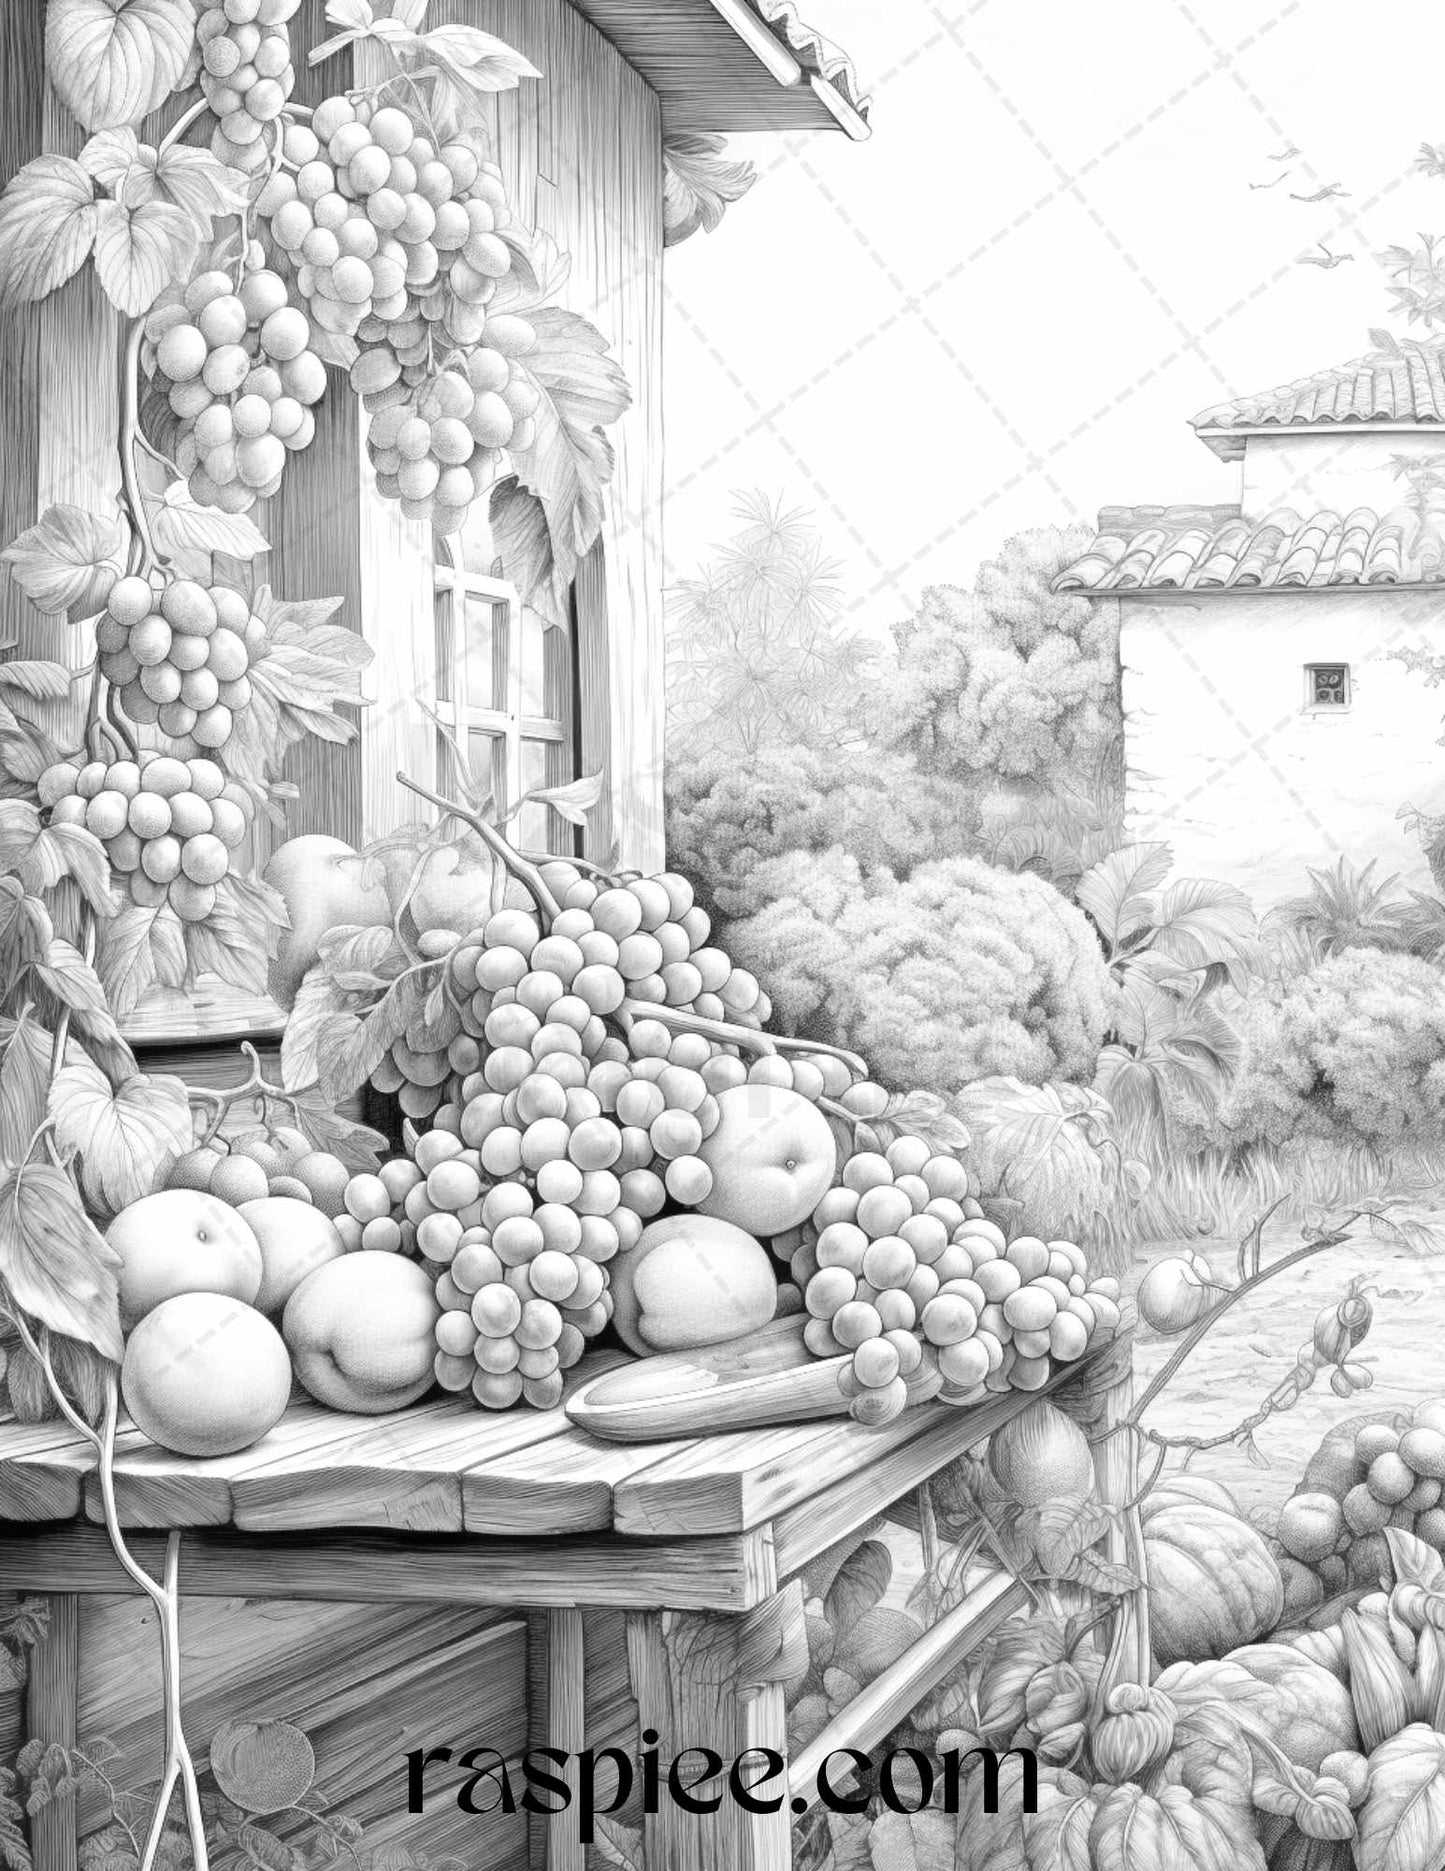 Fruit garden grayscale coloring pages, printable adult coloring, relaxation botanical art, stress relief coloring, detailed grayscale illustrations